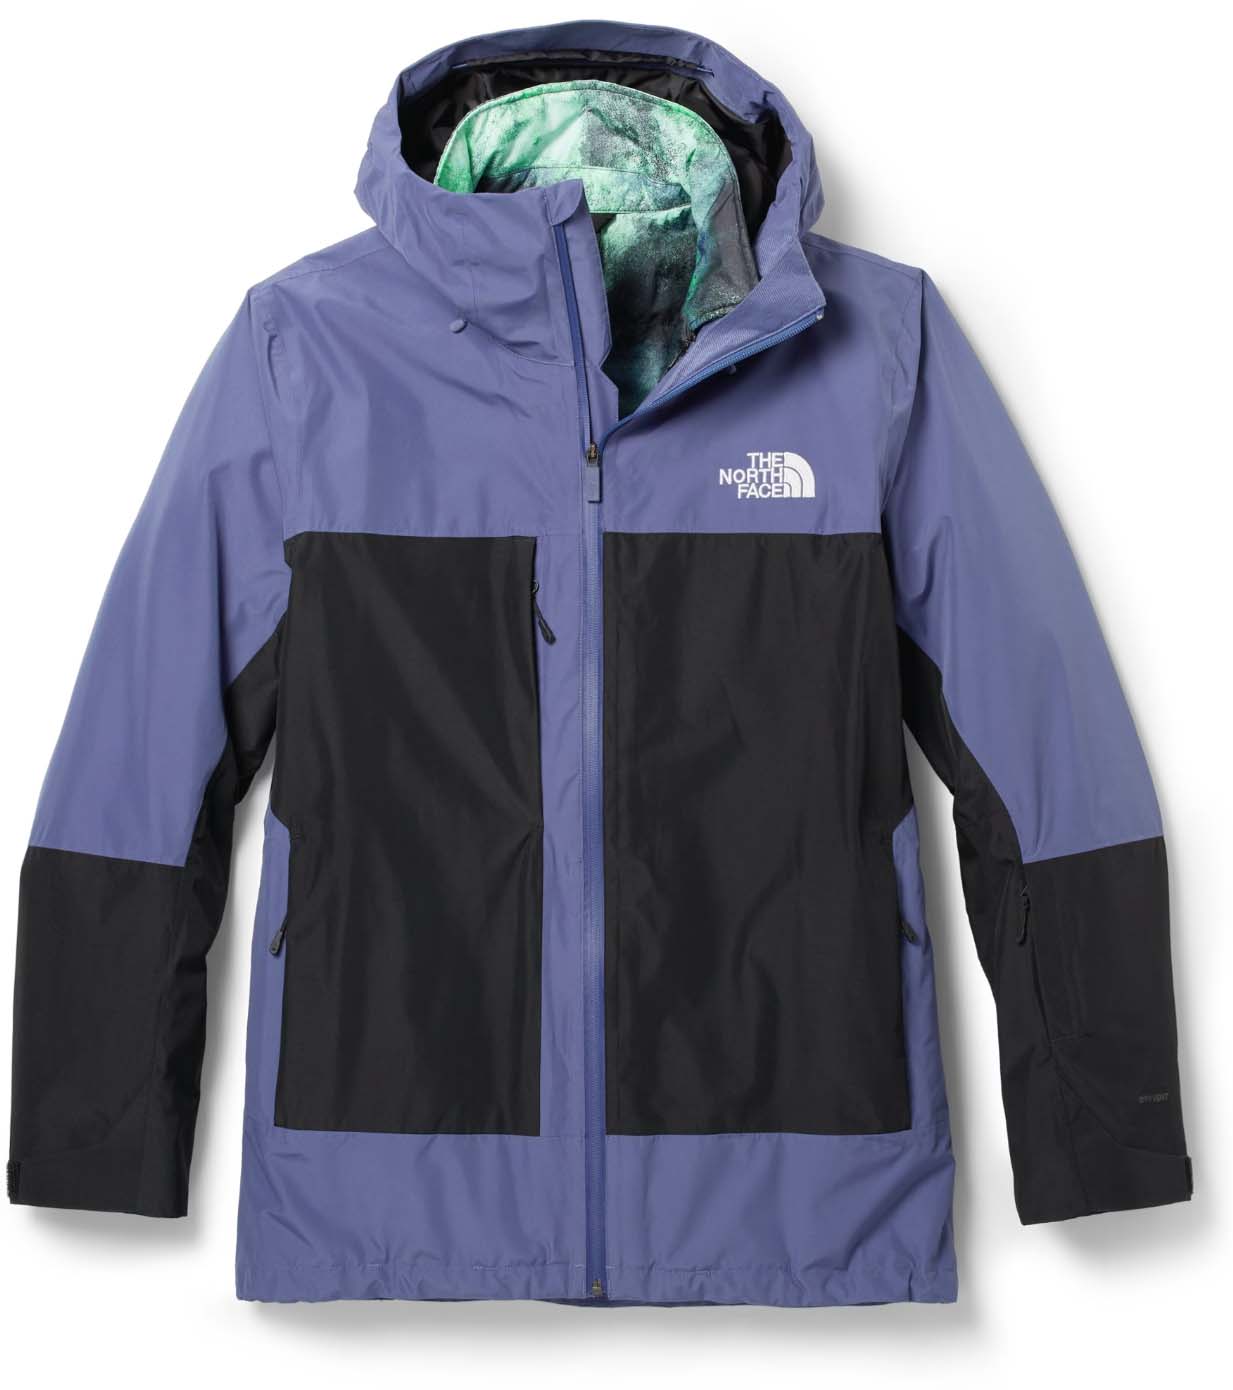 The North Face: Black Paneled Sport Top